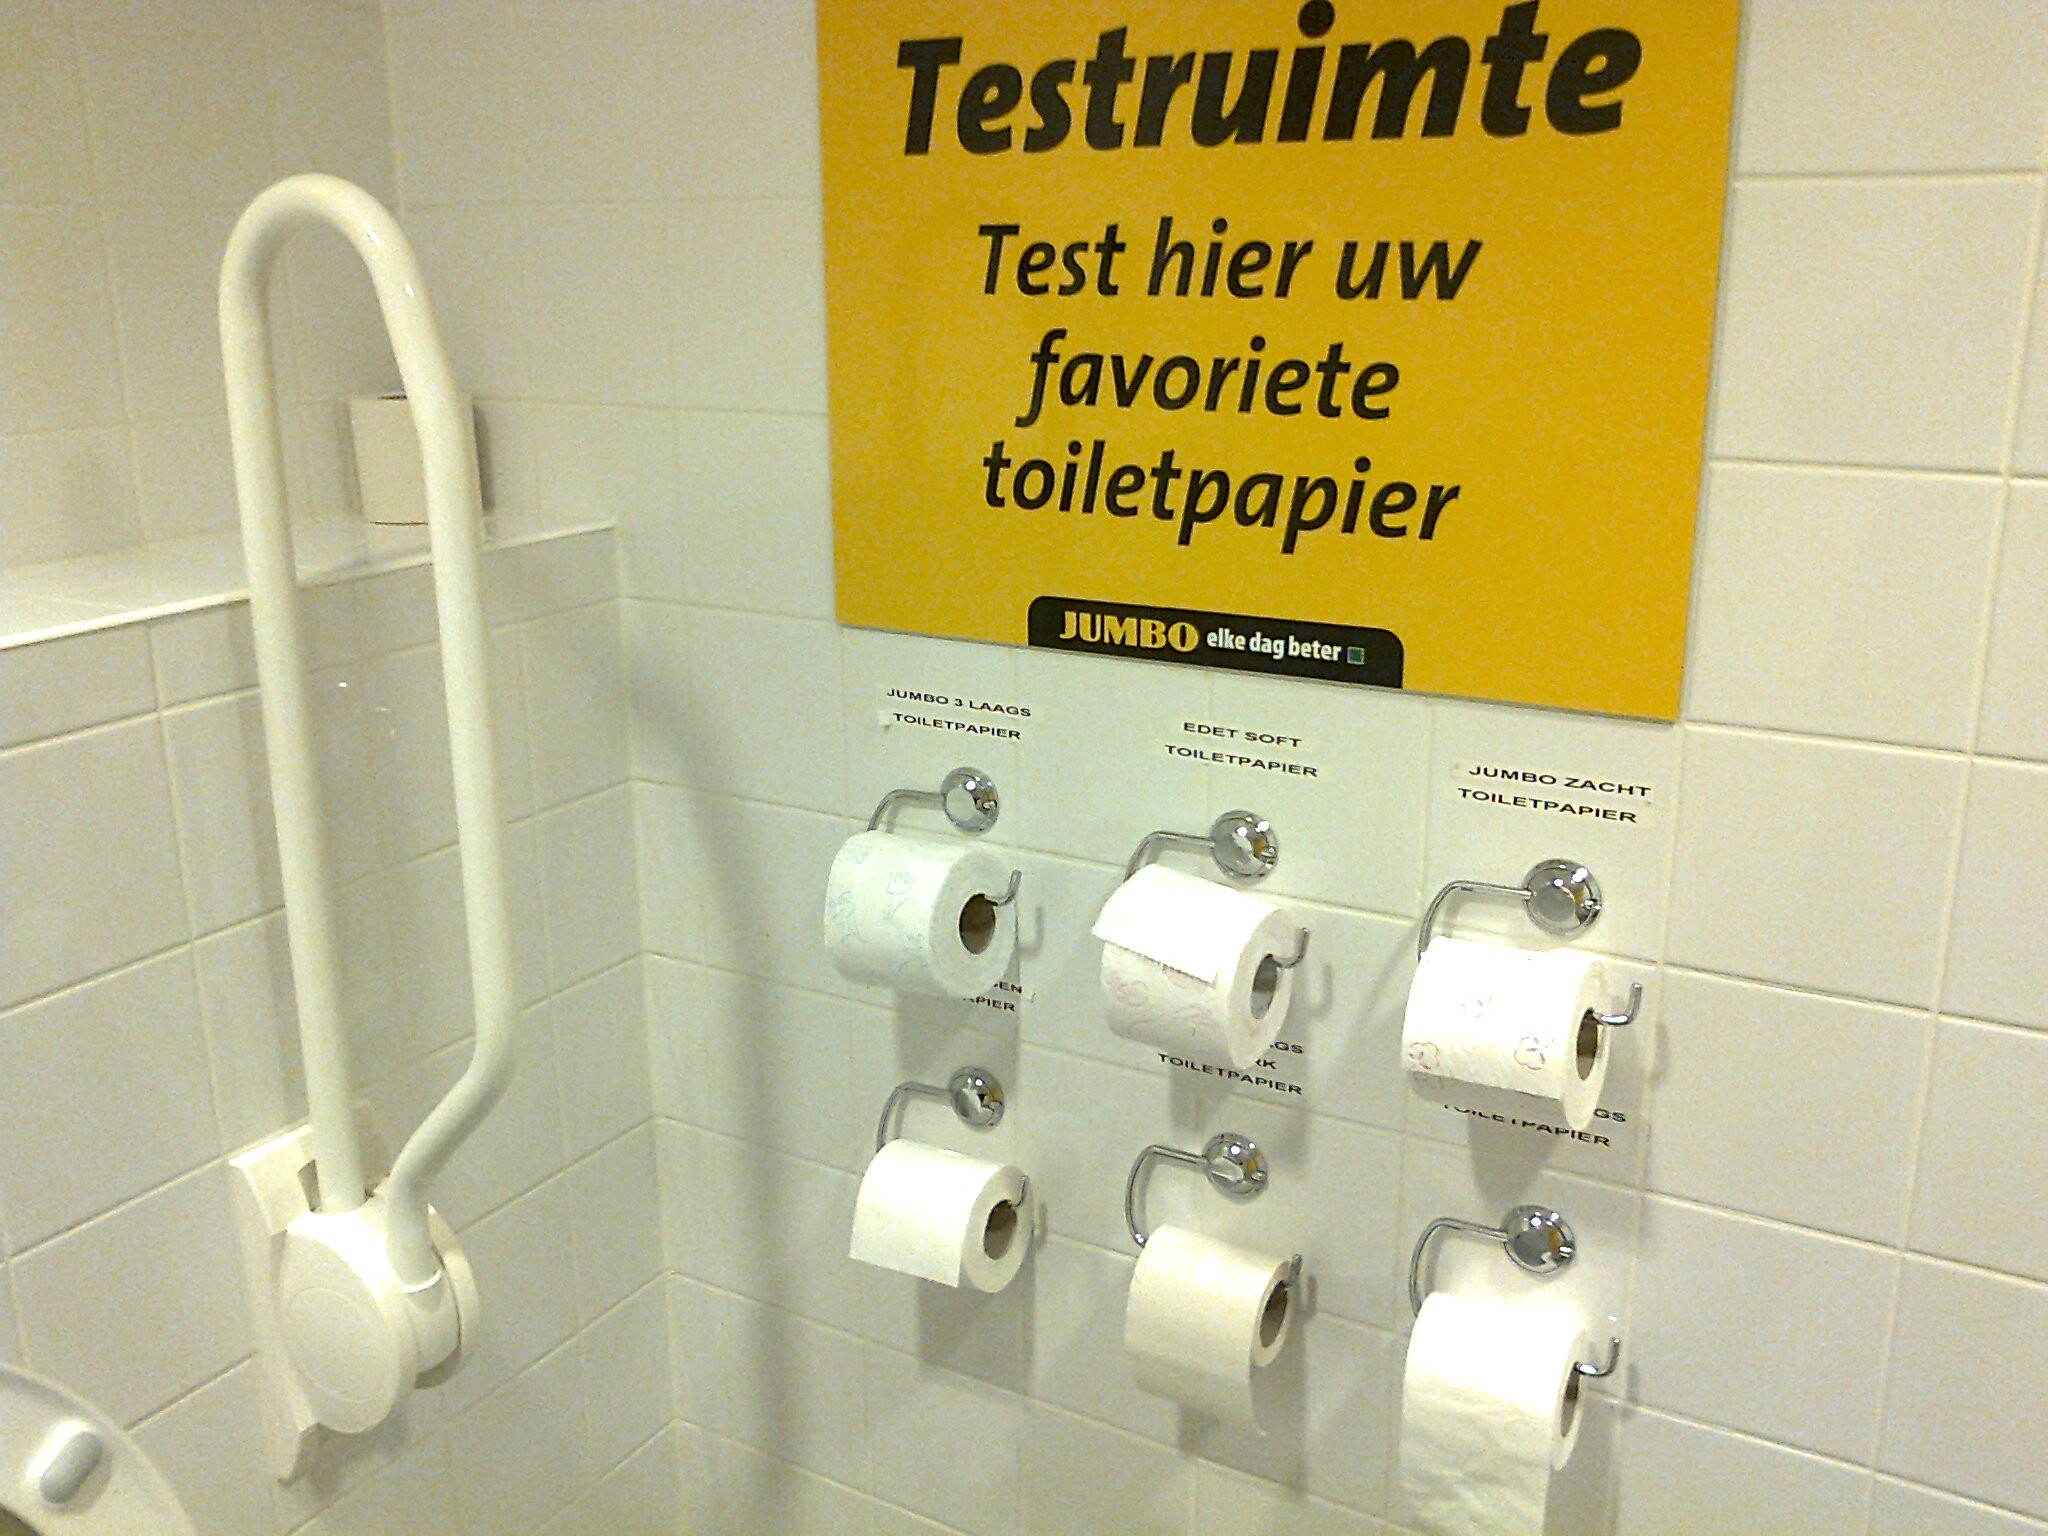 There is a bathroom in a Dutch grocery store with various brands of toilet paper so customers can test them out before they purchase.